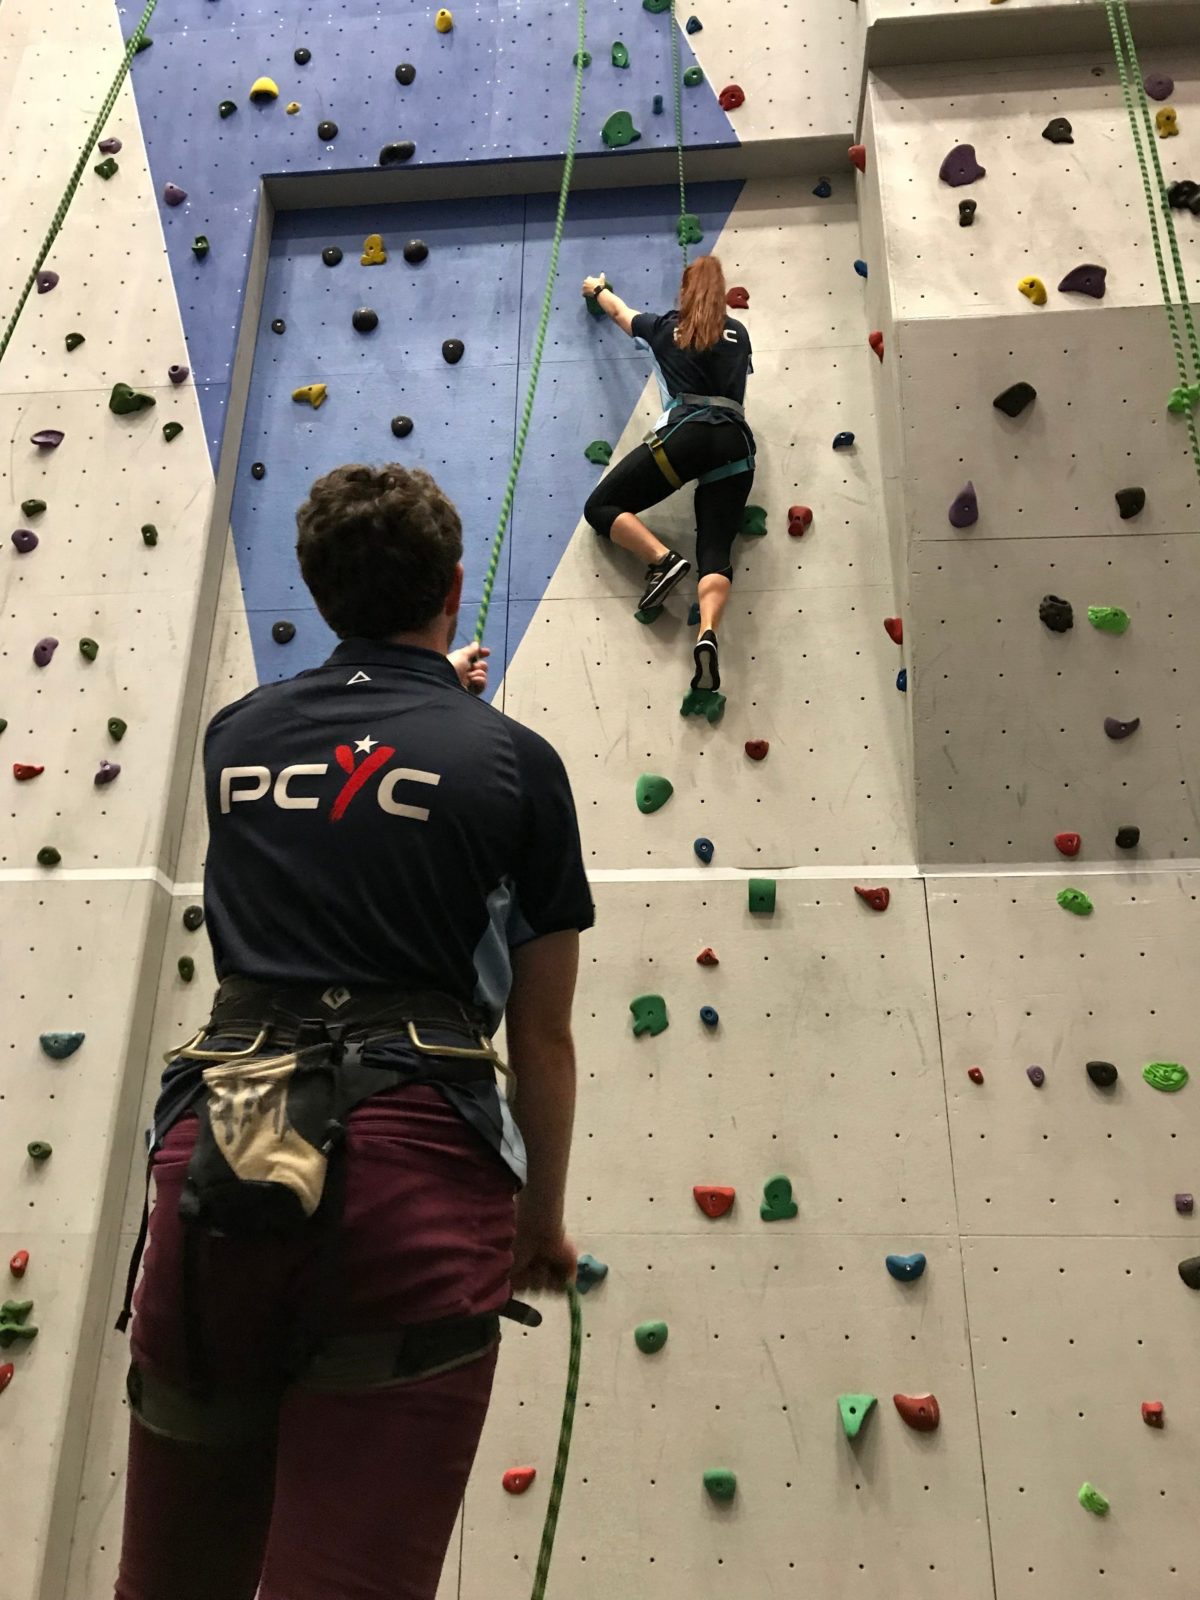 Lots of great activities on offer at PCYC